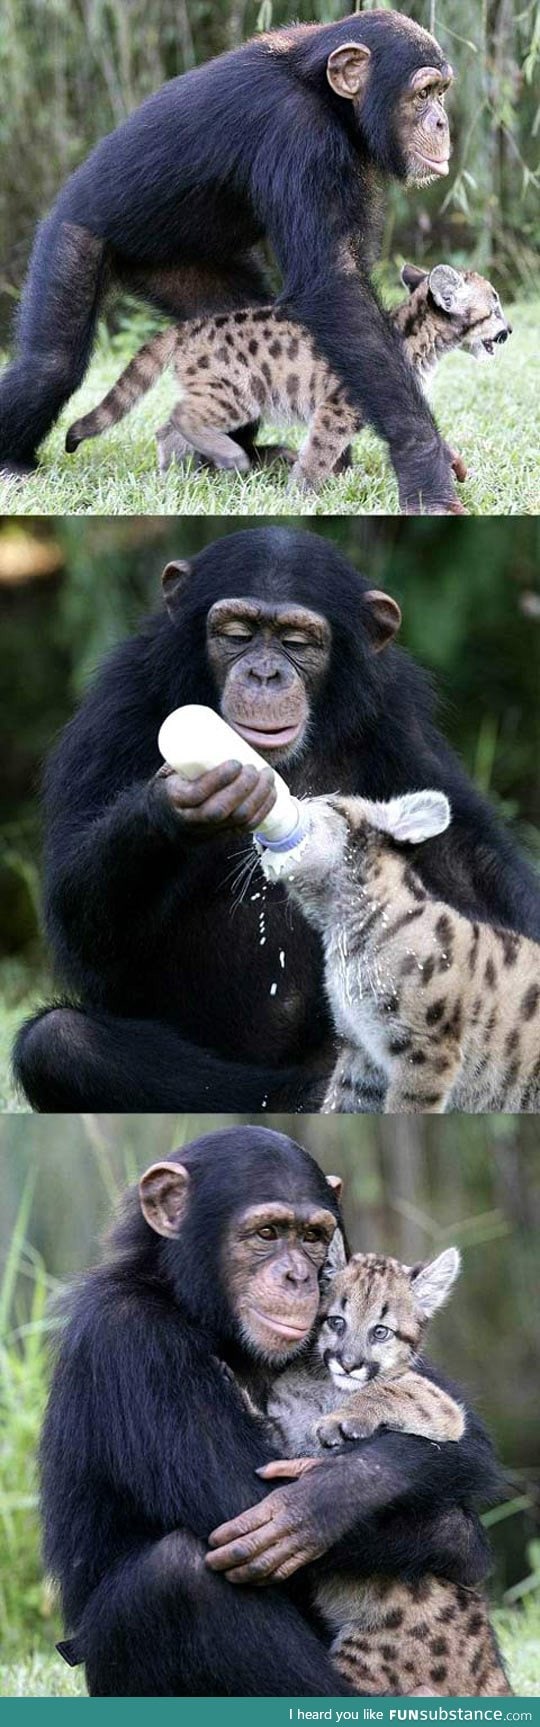 Ape taking care of a baby leopard